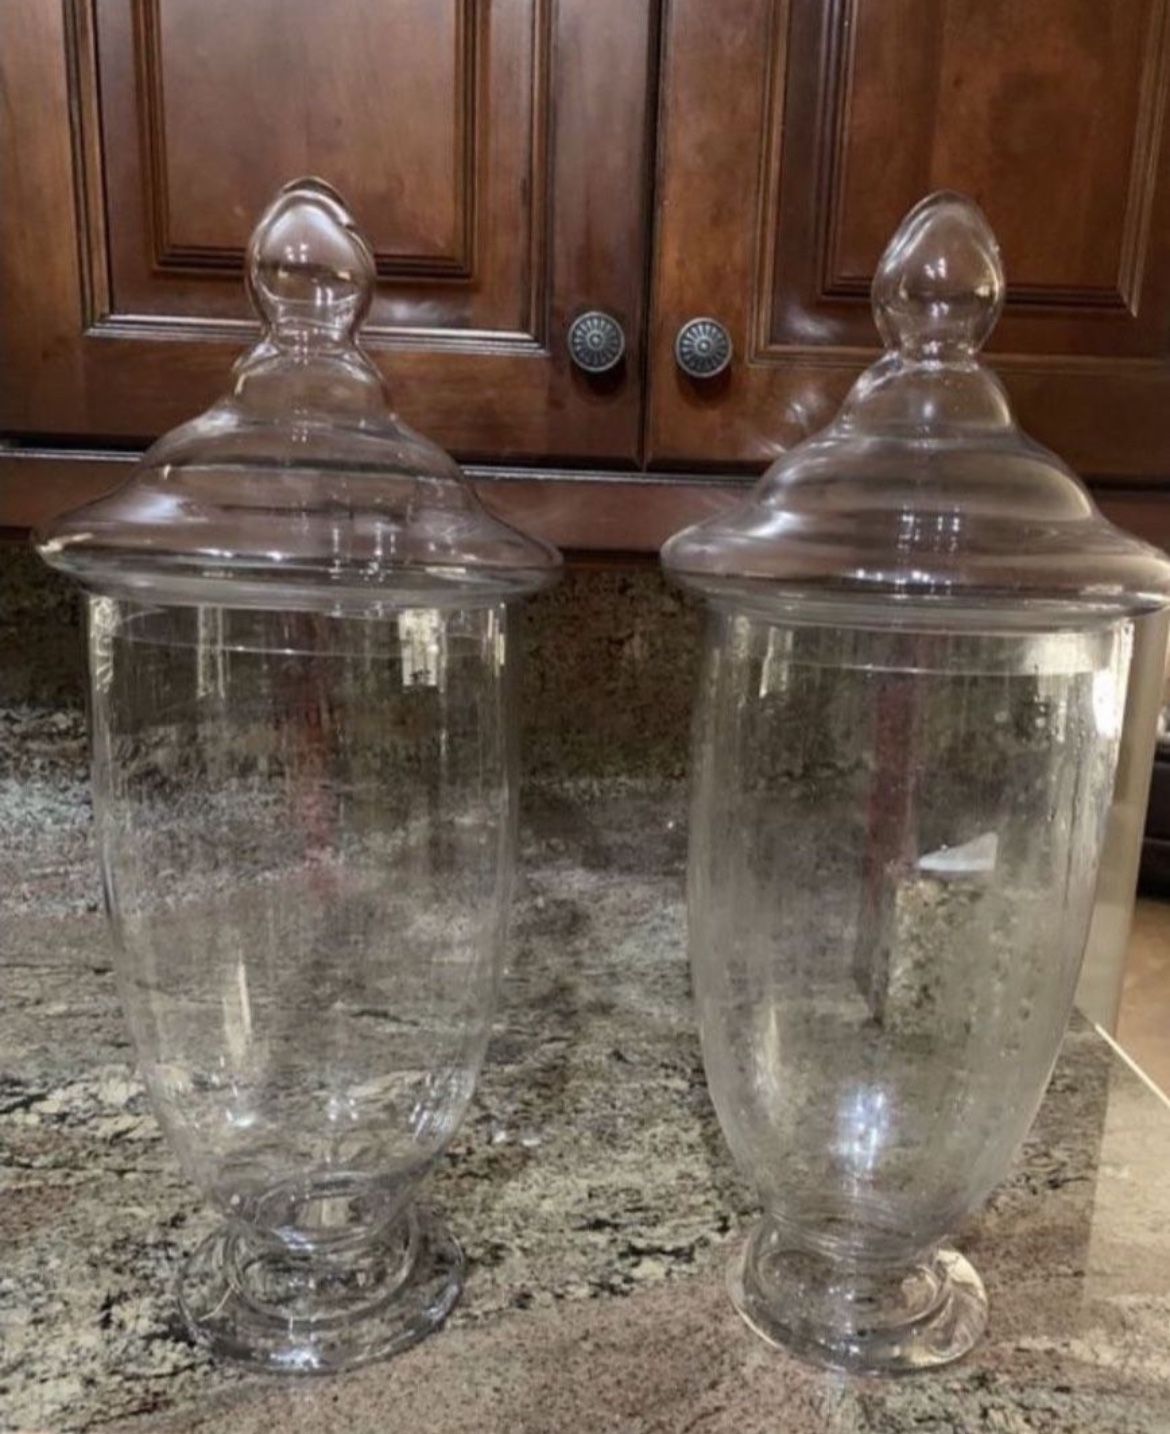 2 large apothecary jars 23” tall originally $60 each NOW both for $45 JUST LOWERED PRICE 